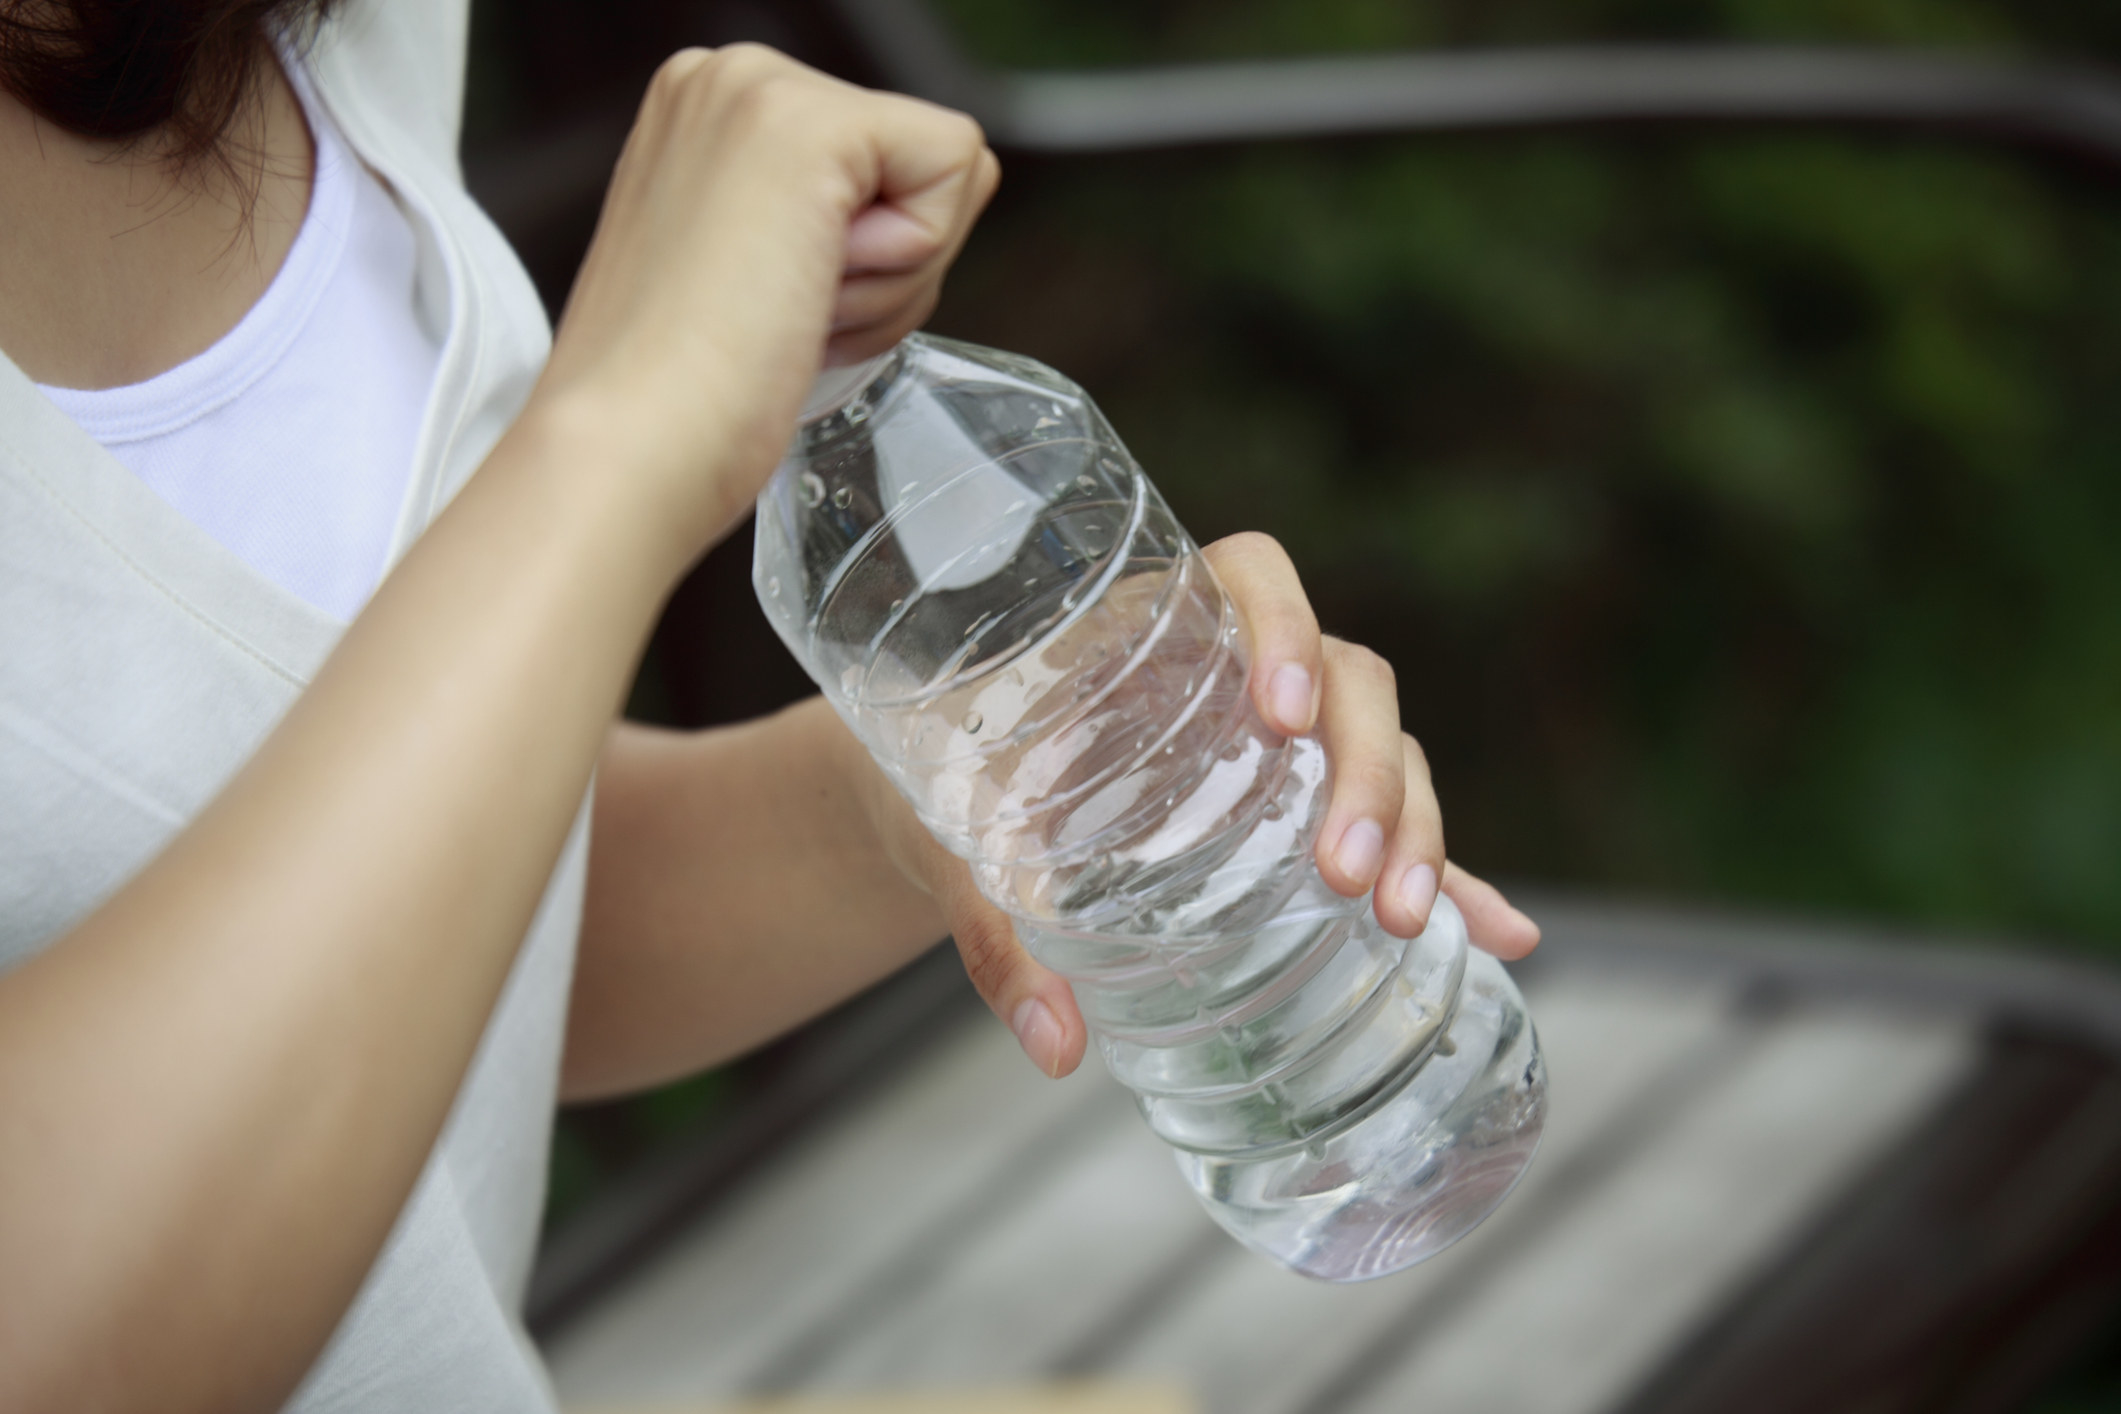 A young person opens a plastic water bottle to drink outside